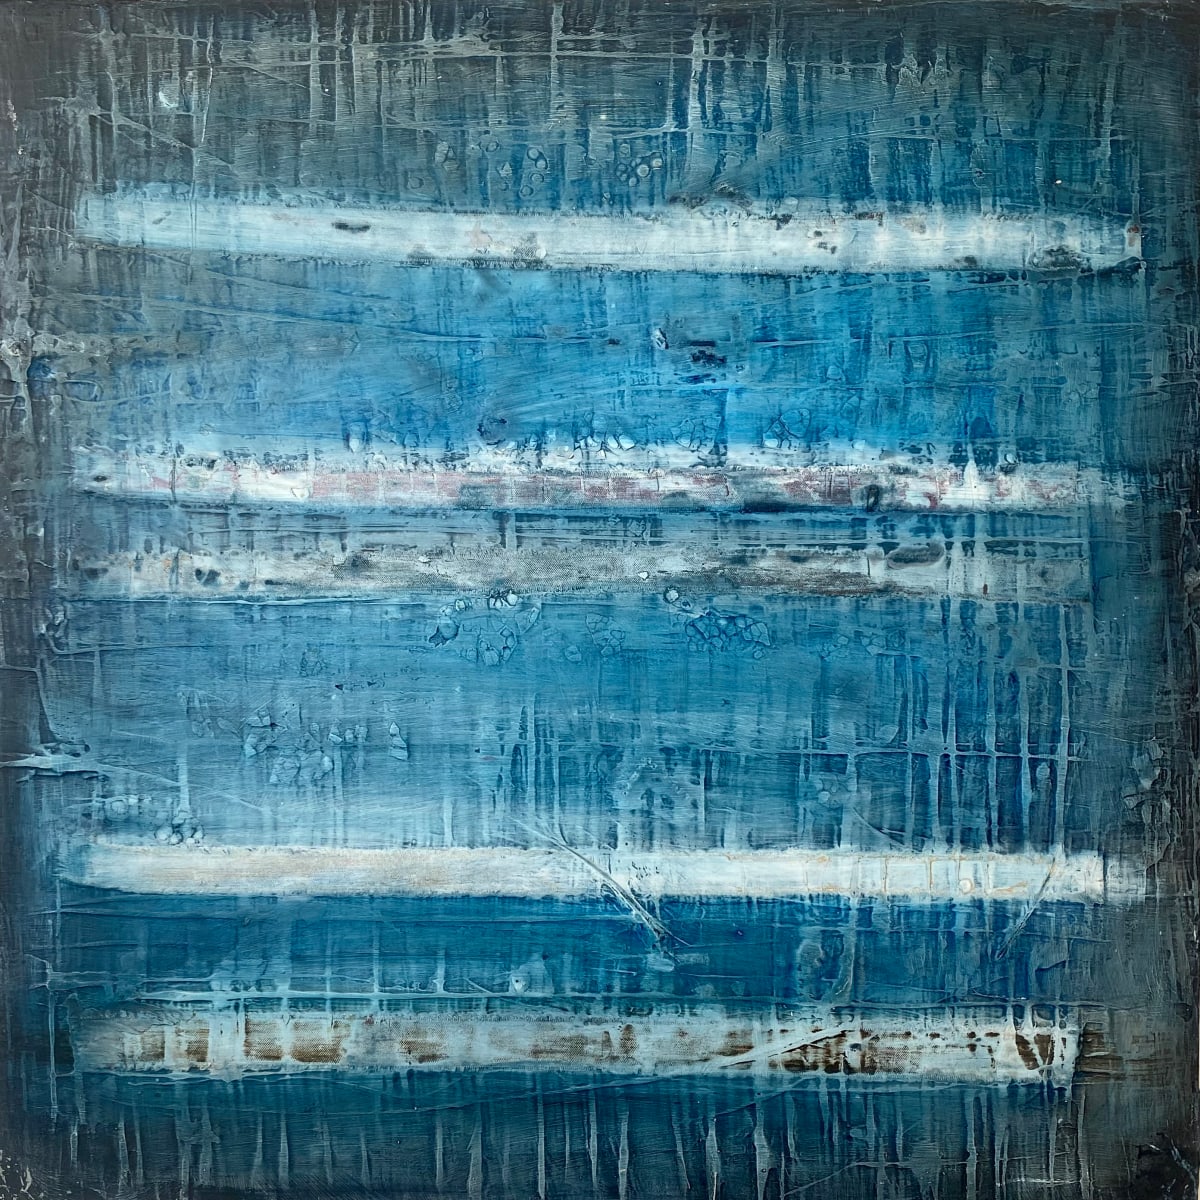 Prelude #1 by John Worth  Image: Square blue abstract textured painting with five lines. Acrylics and oils on board with mixed media.